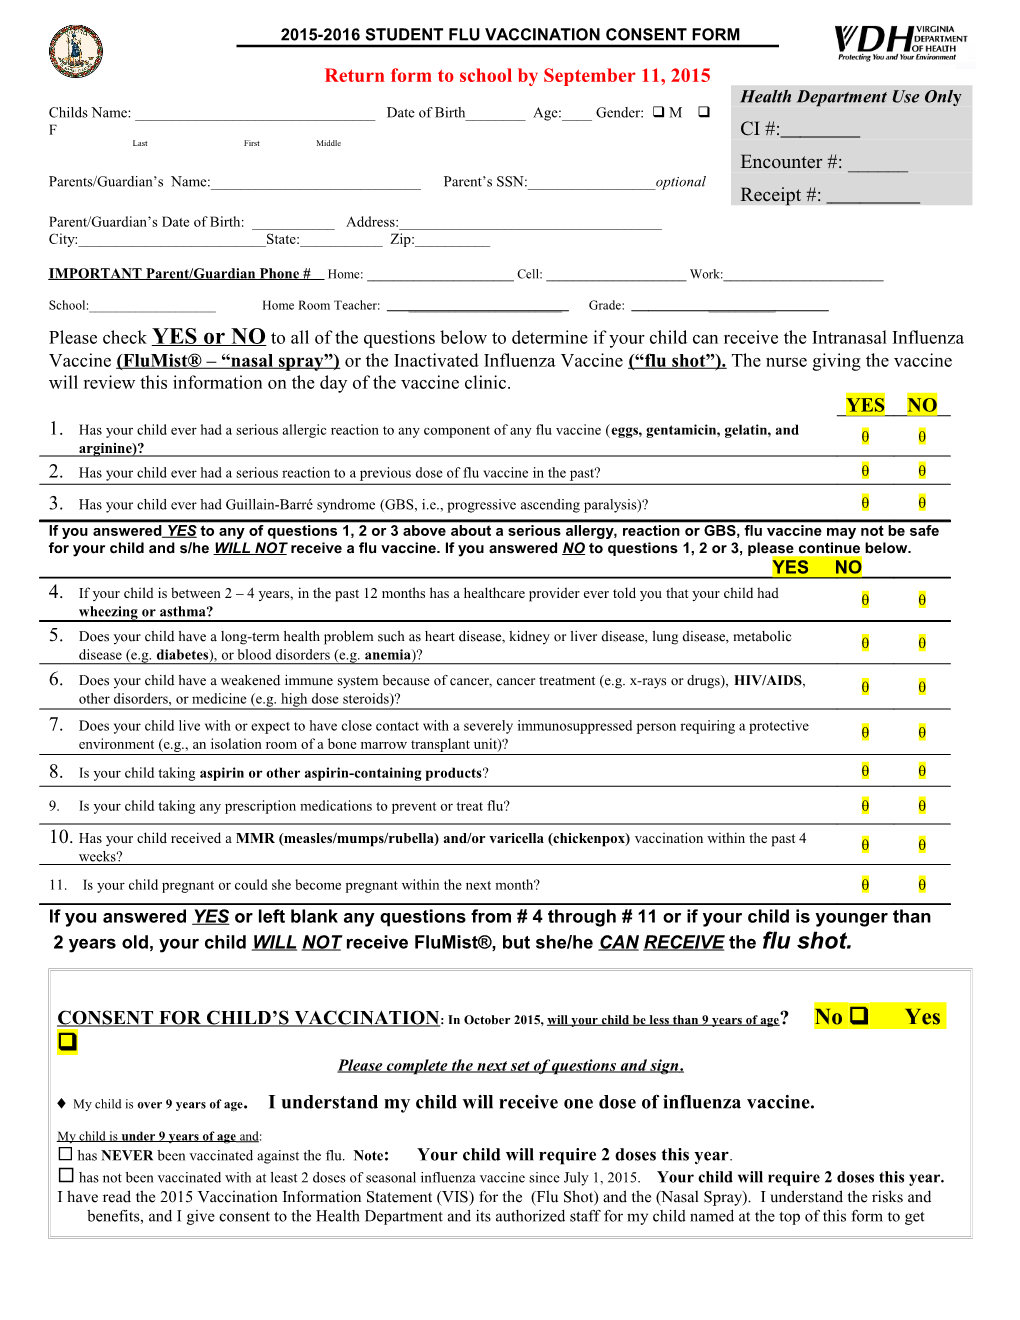 STUDENT Influenza Vaccination Consent Form s2